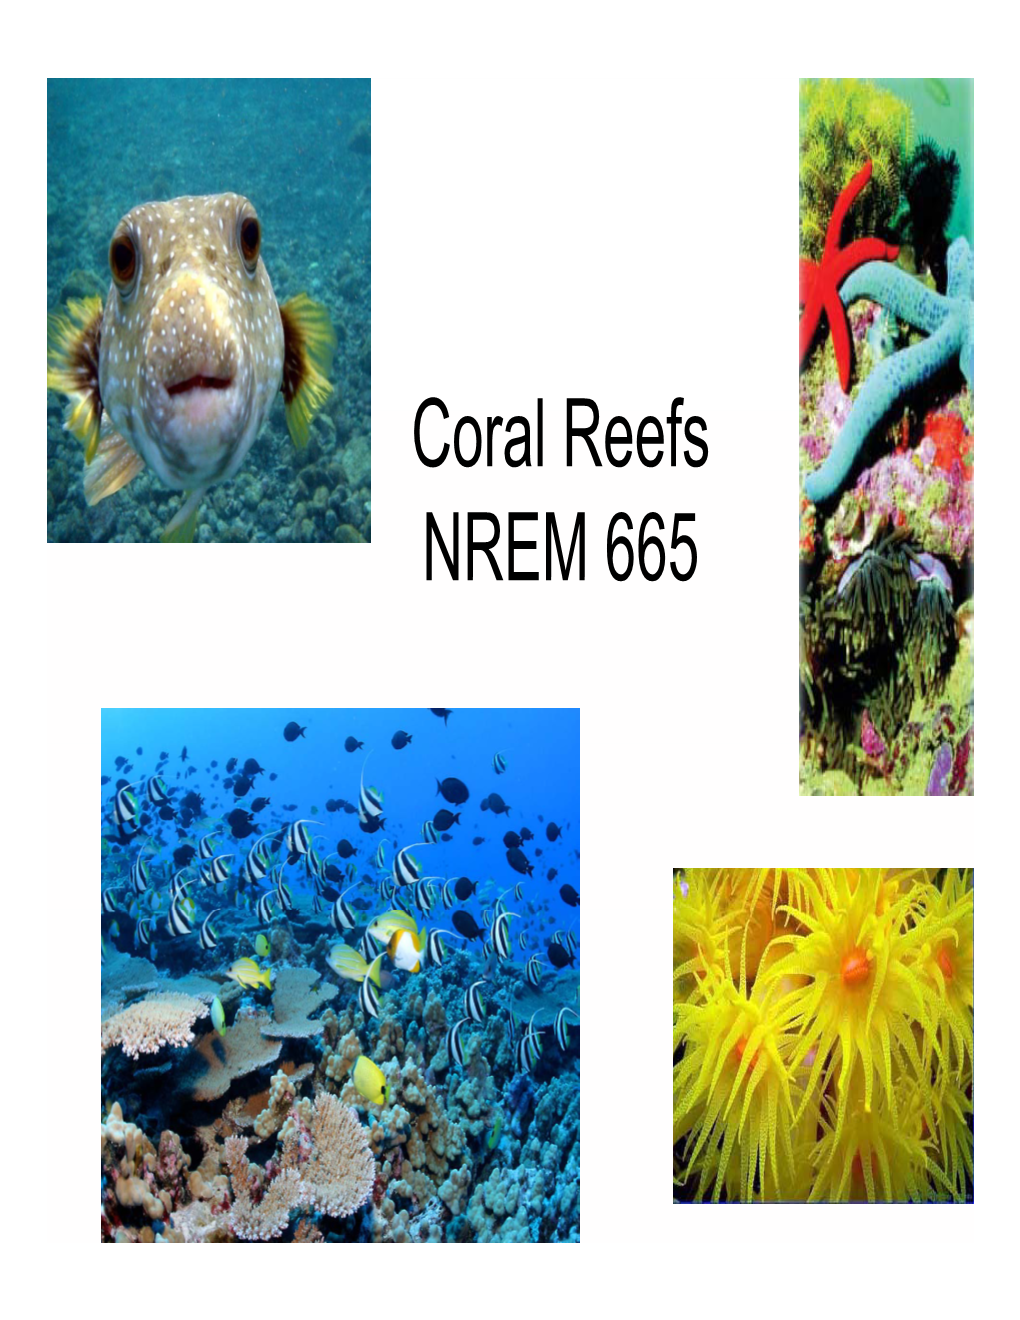 I. Coral Reef (CR) Formation & Development